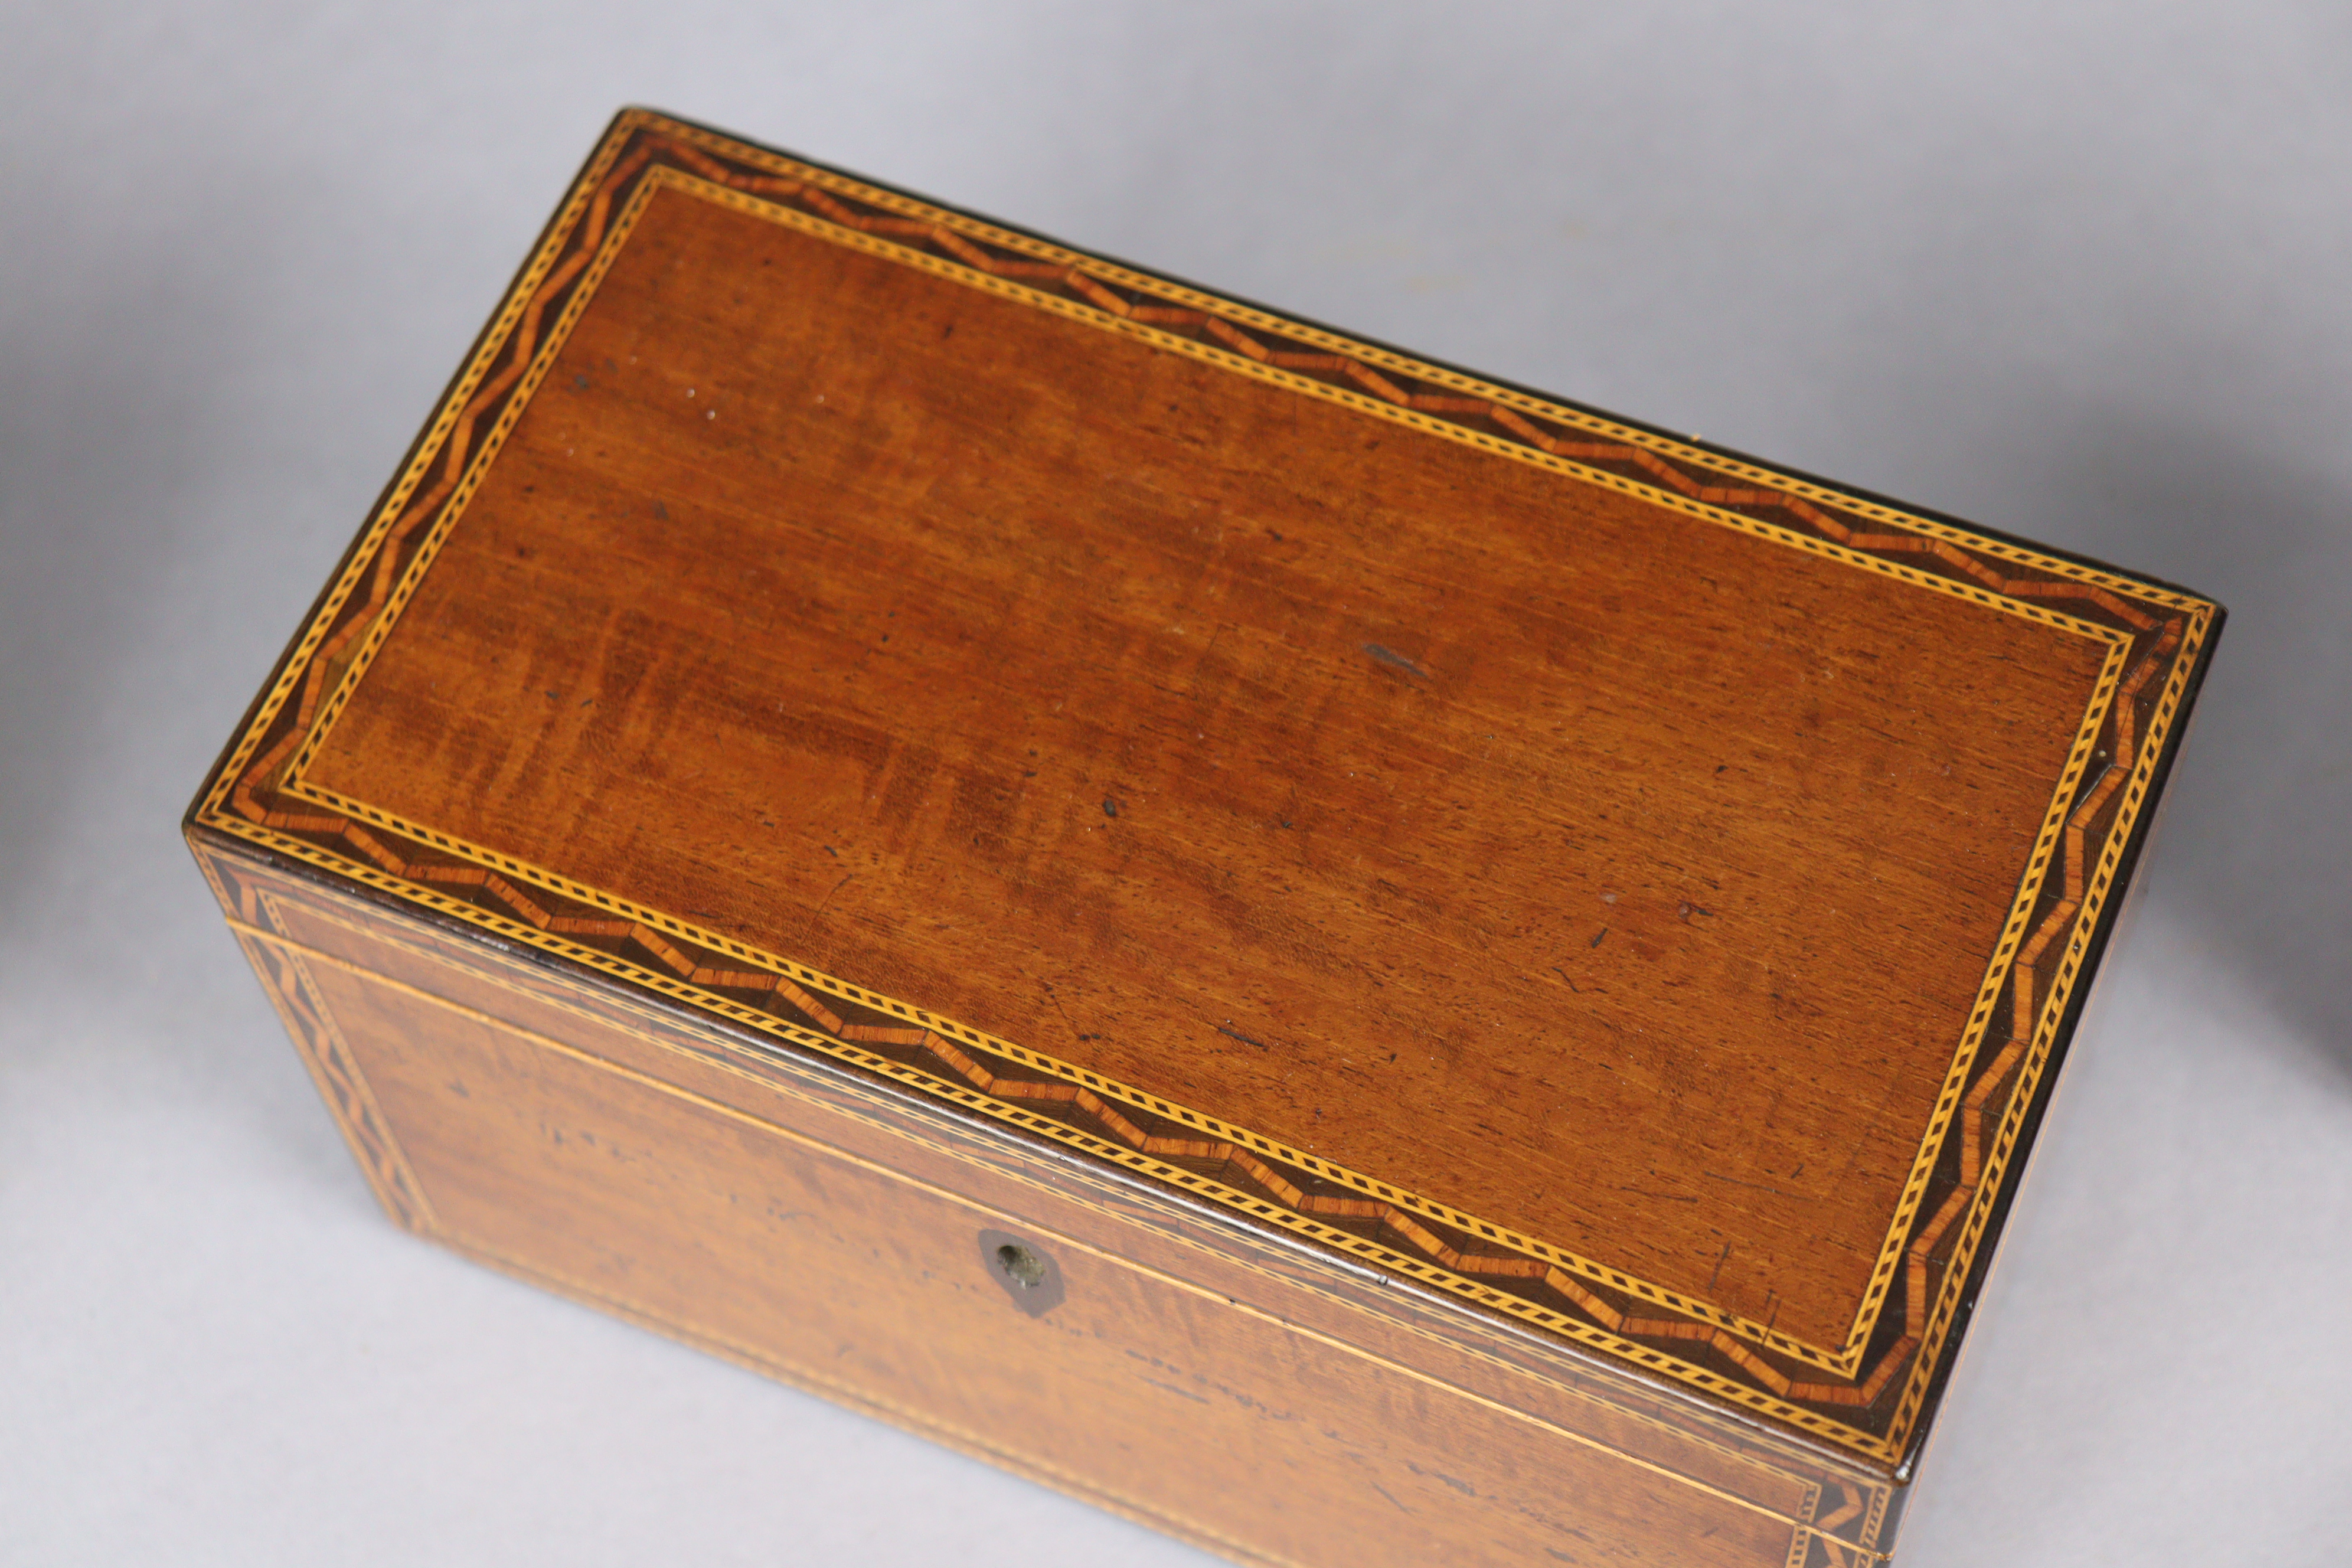 An early 19th century inlaid-mahogany two-division tea caddy, 23cm wide x 12.7cm high x 12.7cm deep; - Image 4 of 7